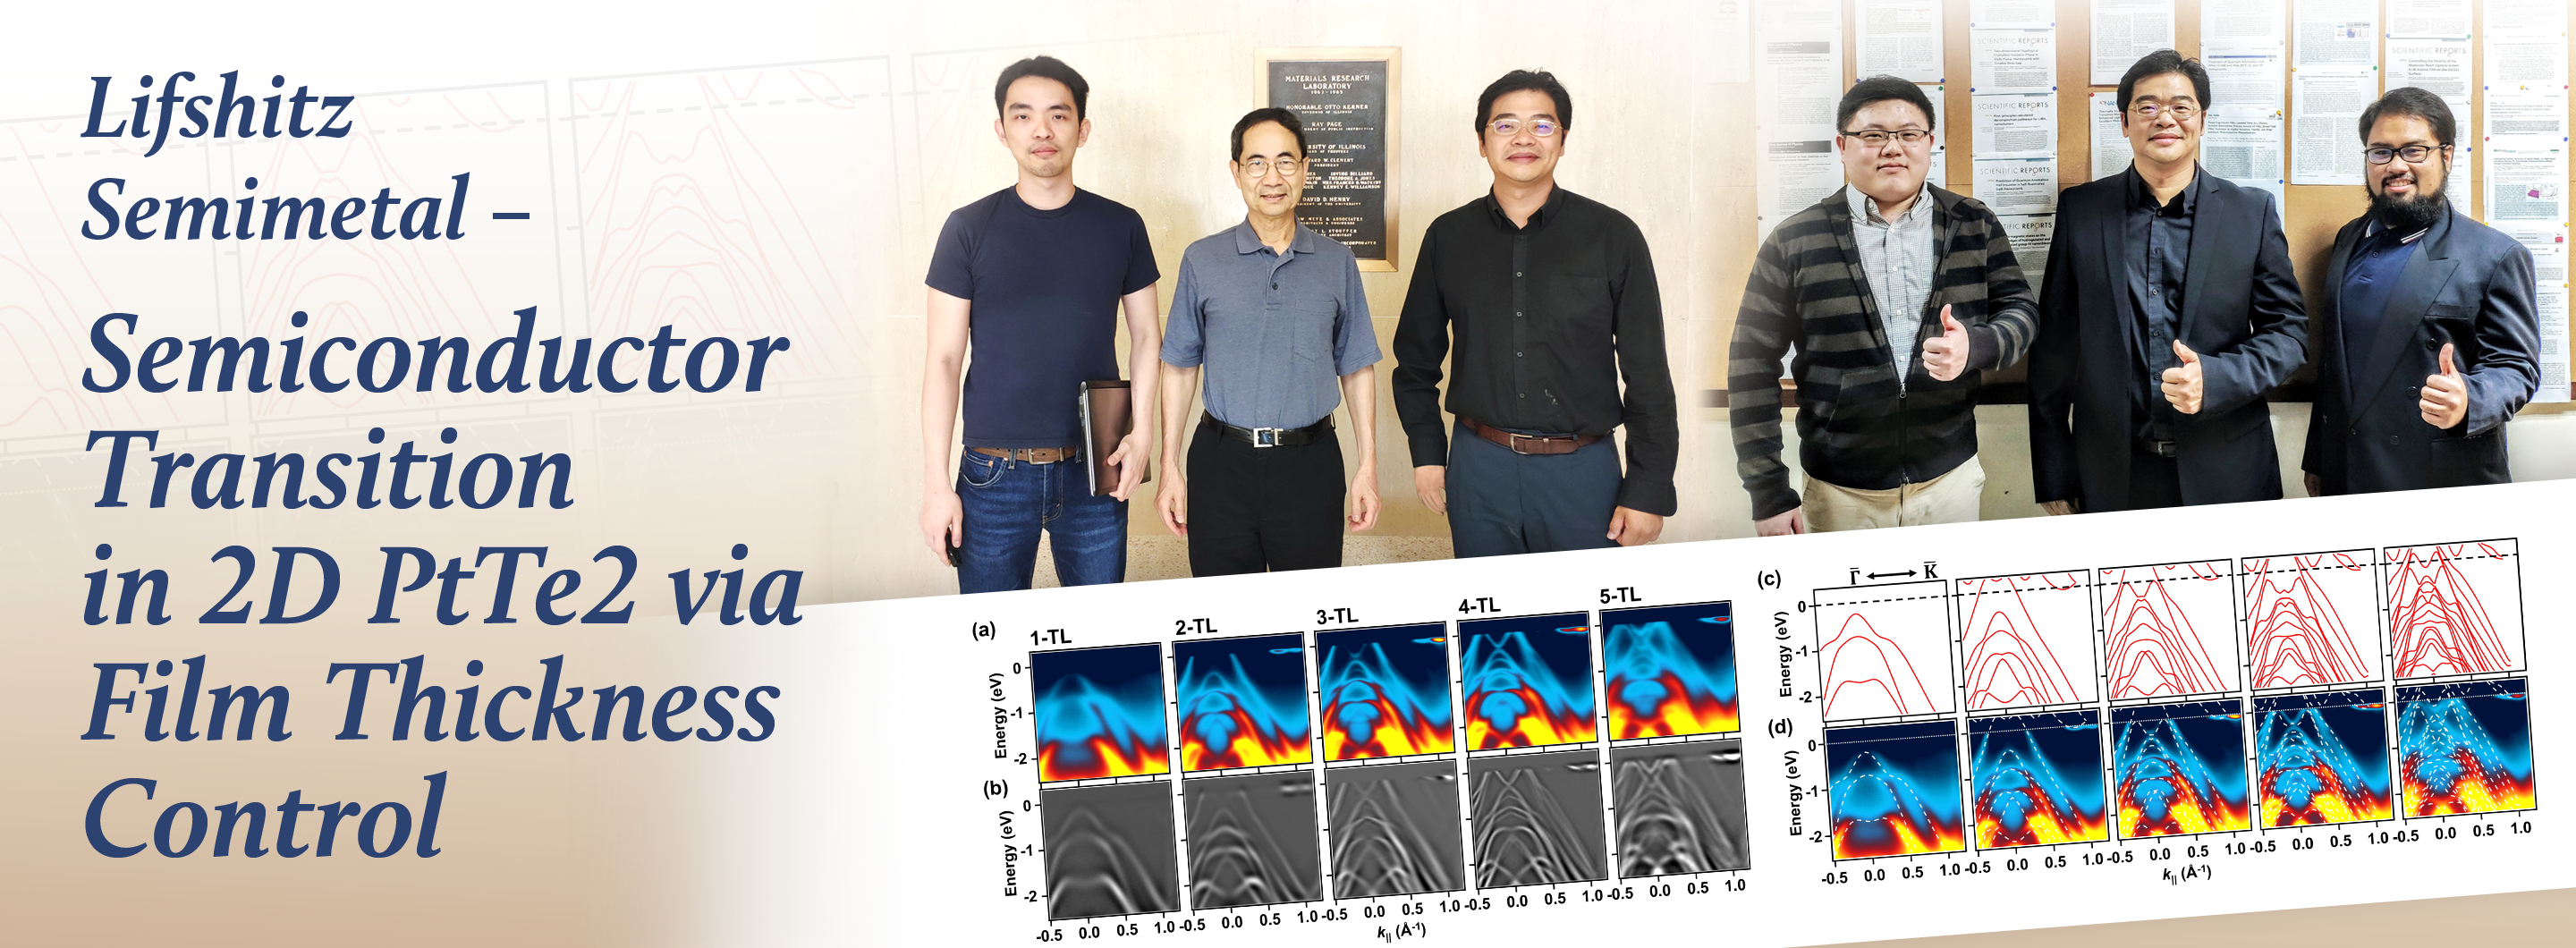 Lifshitz Semimetal – Semiconductor Transition in 2D PtTe2 via Film Thickness Control